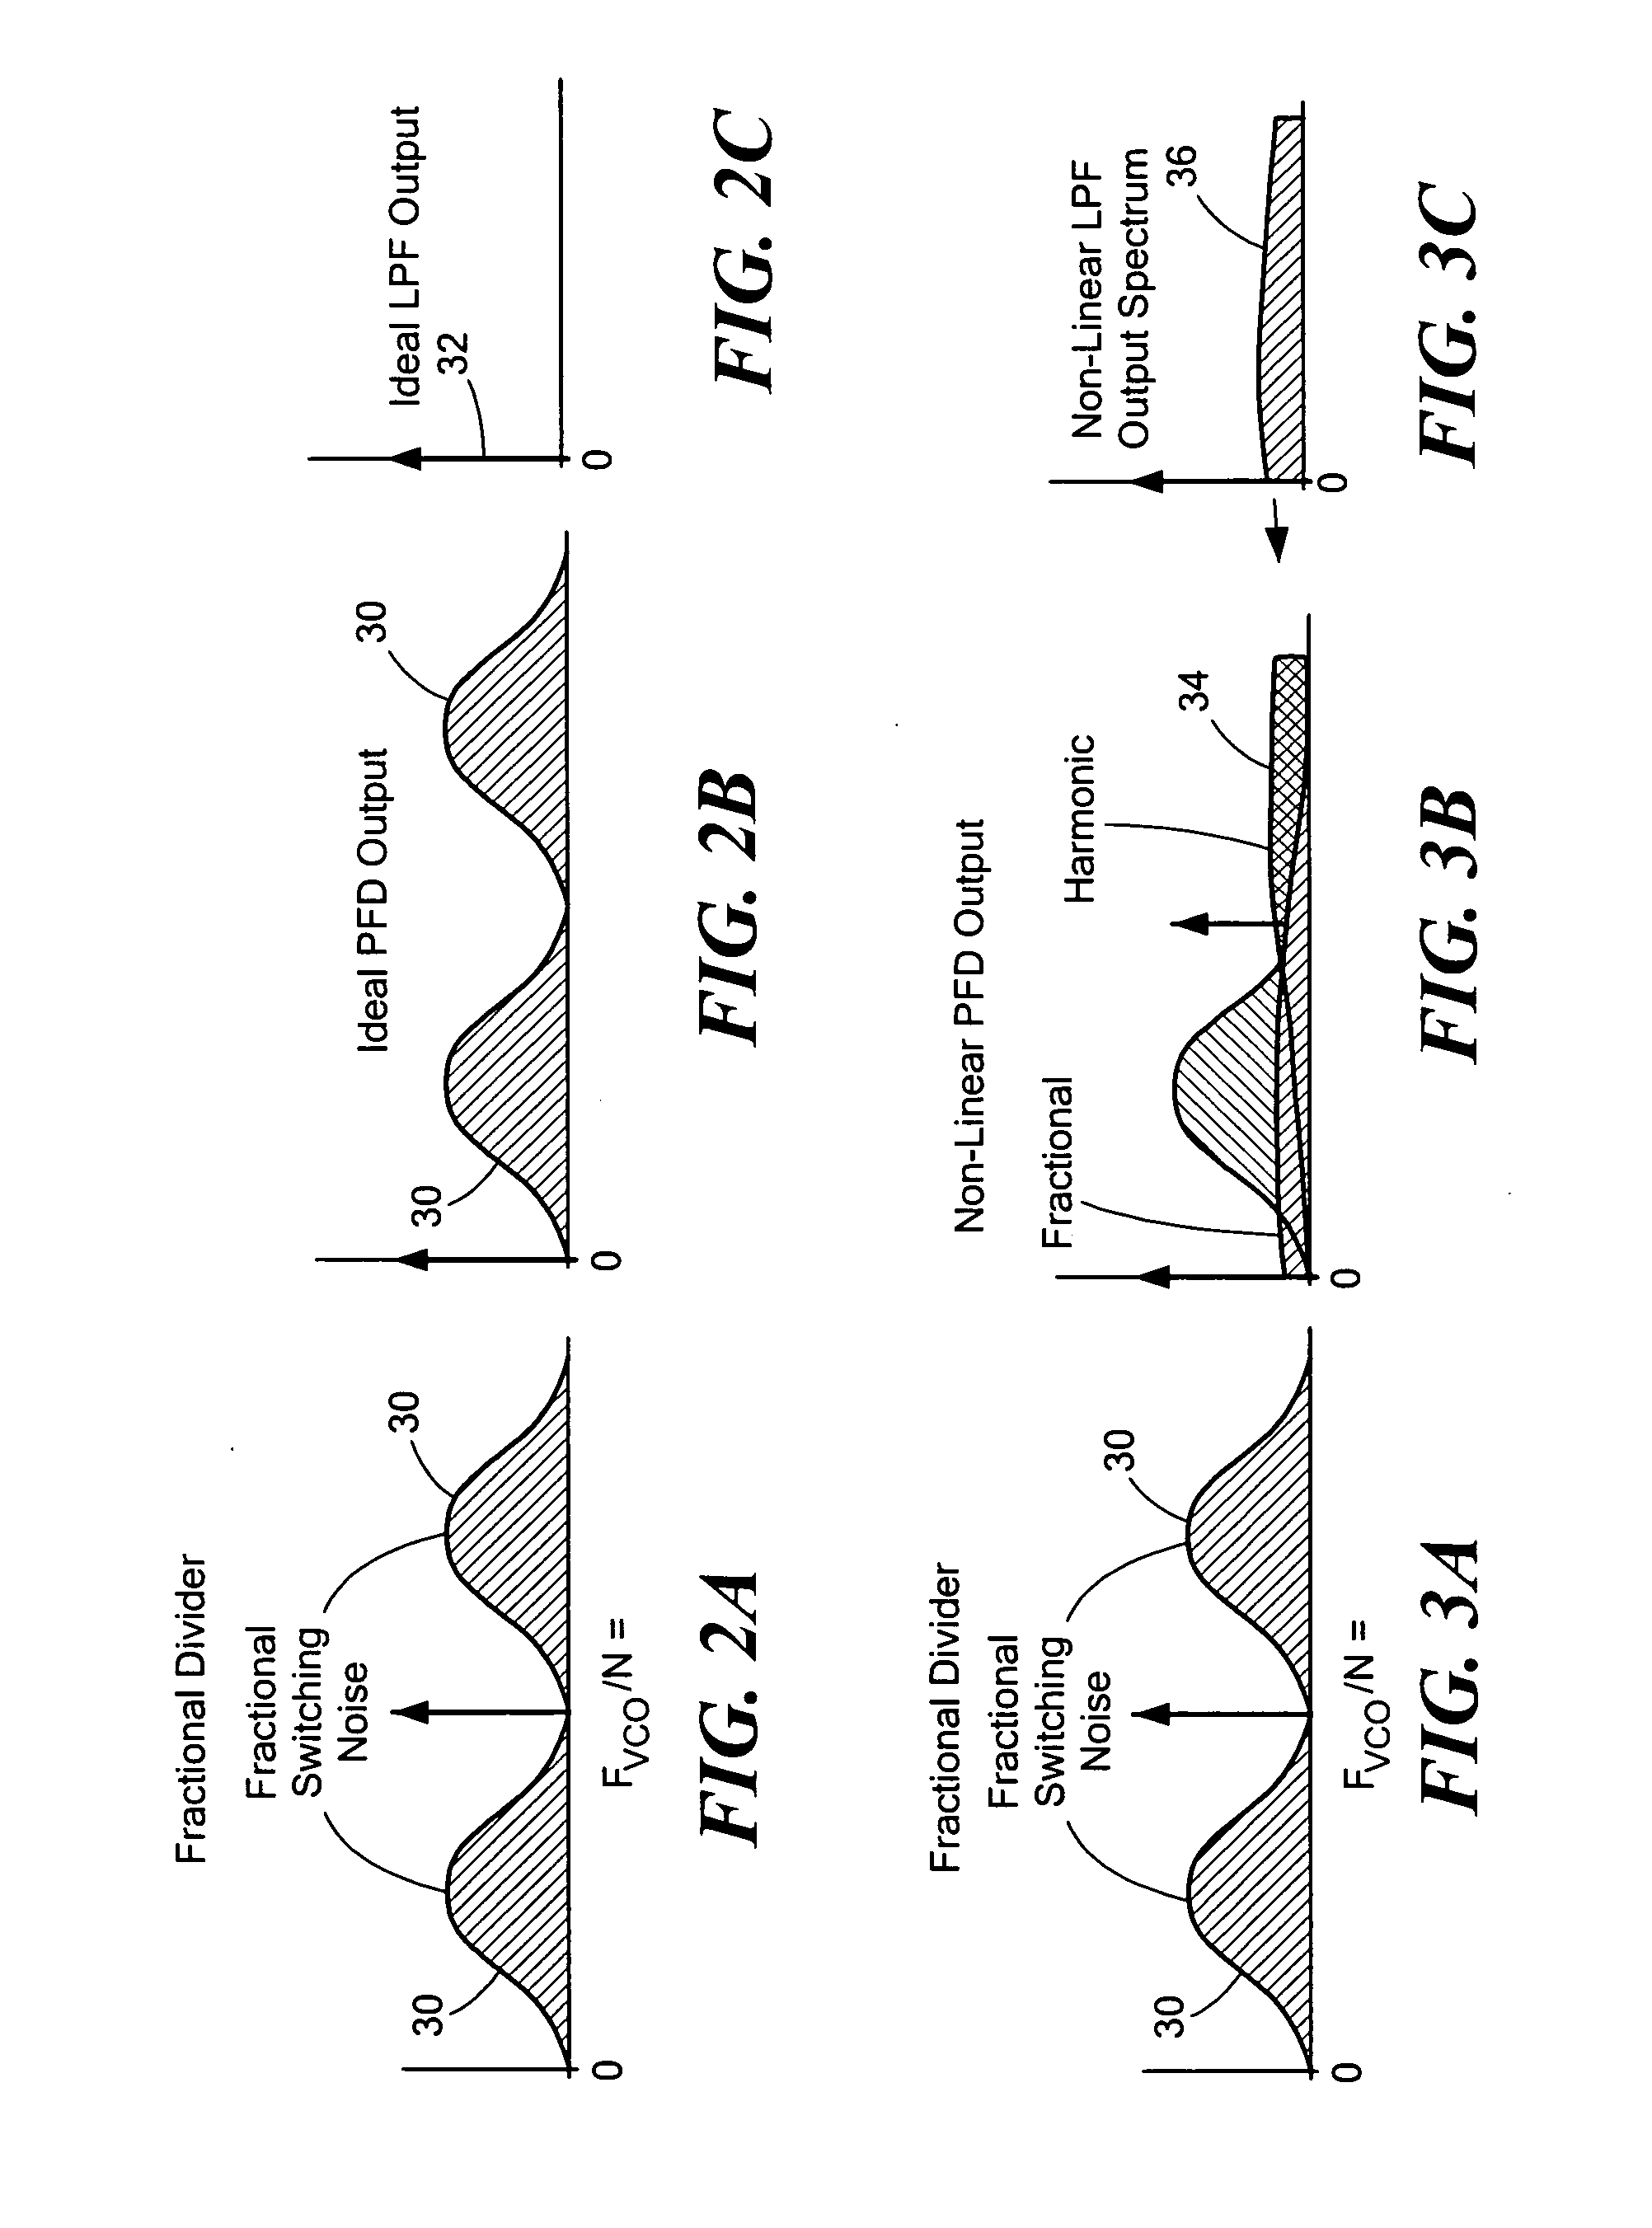 Fractional-N frequency synthesizer having reduced fractional switching noise